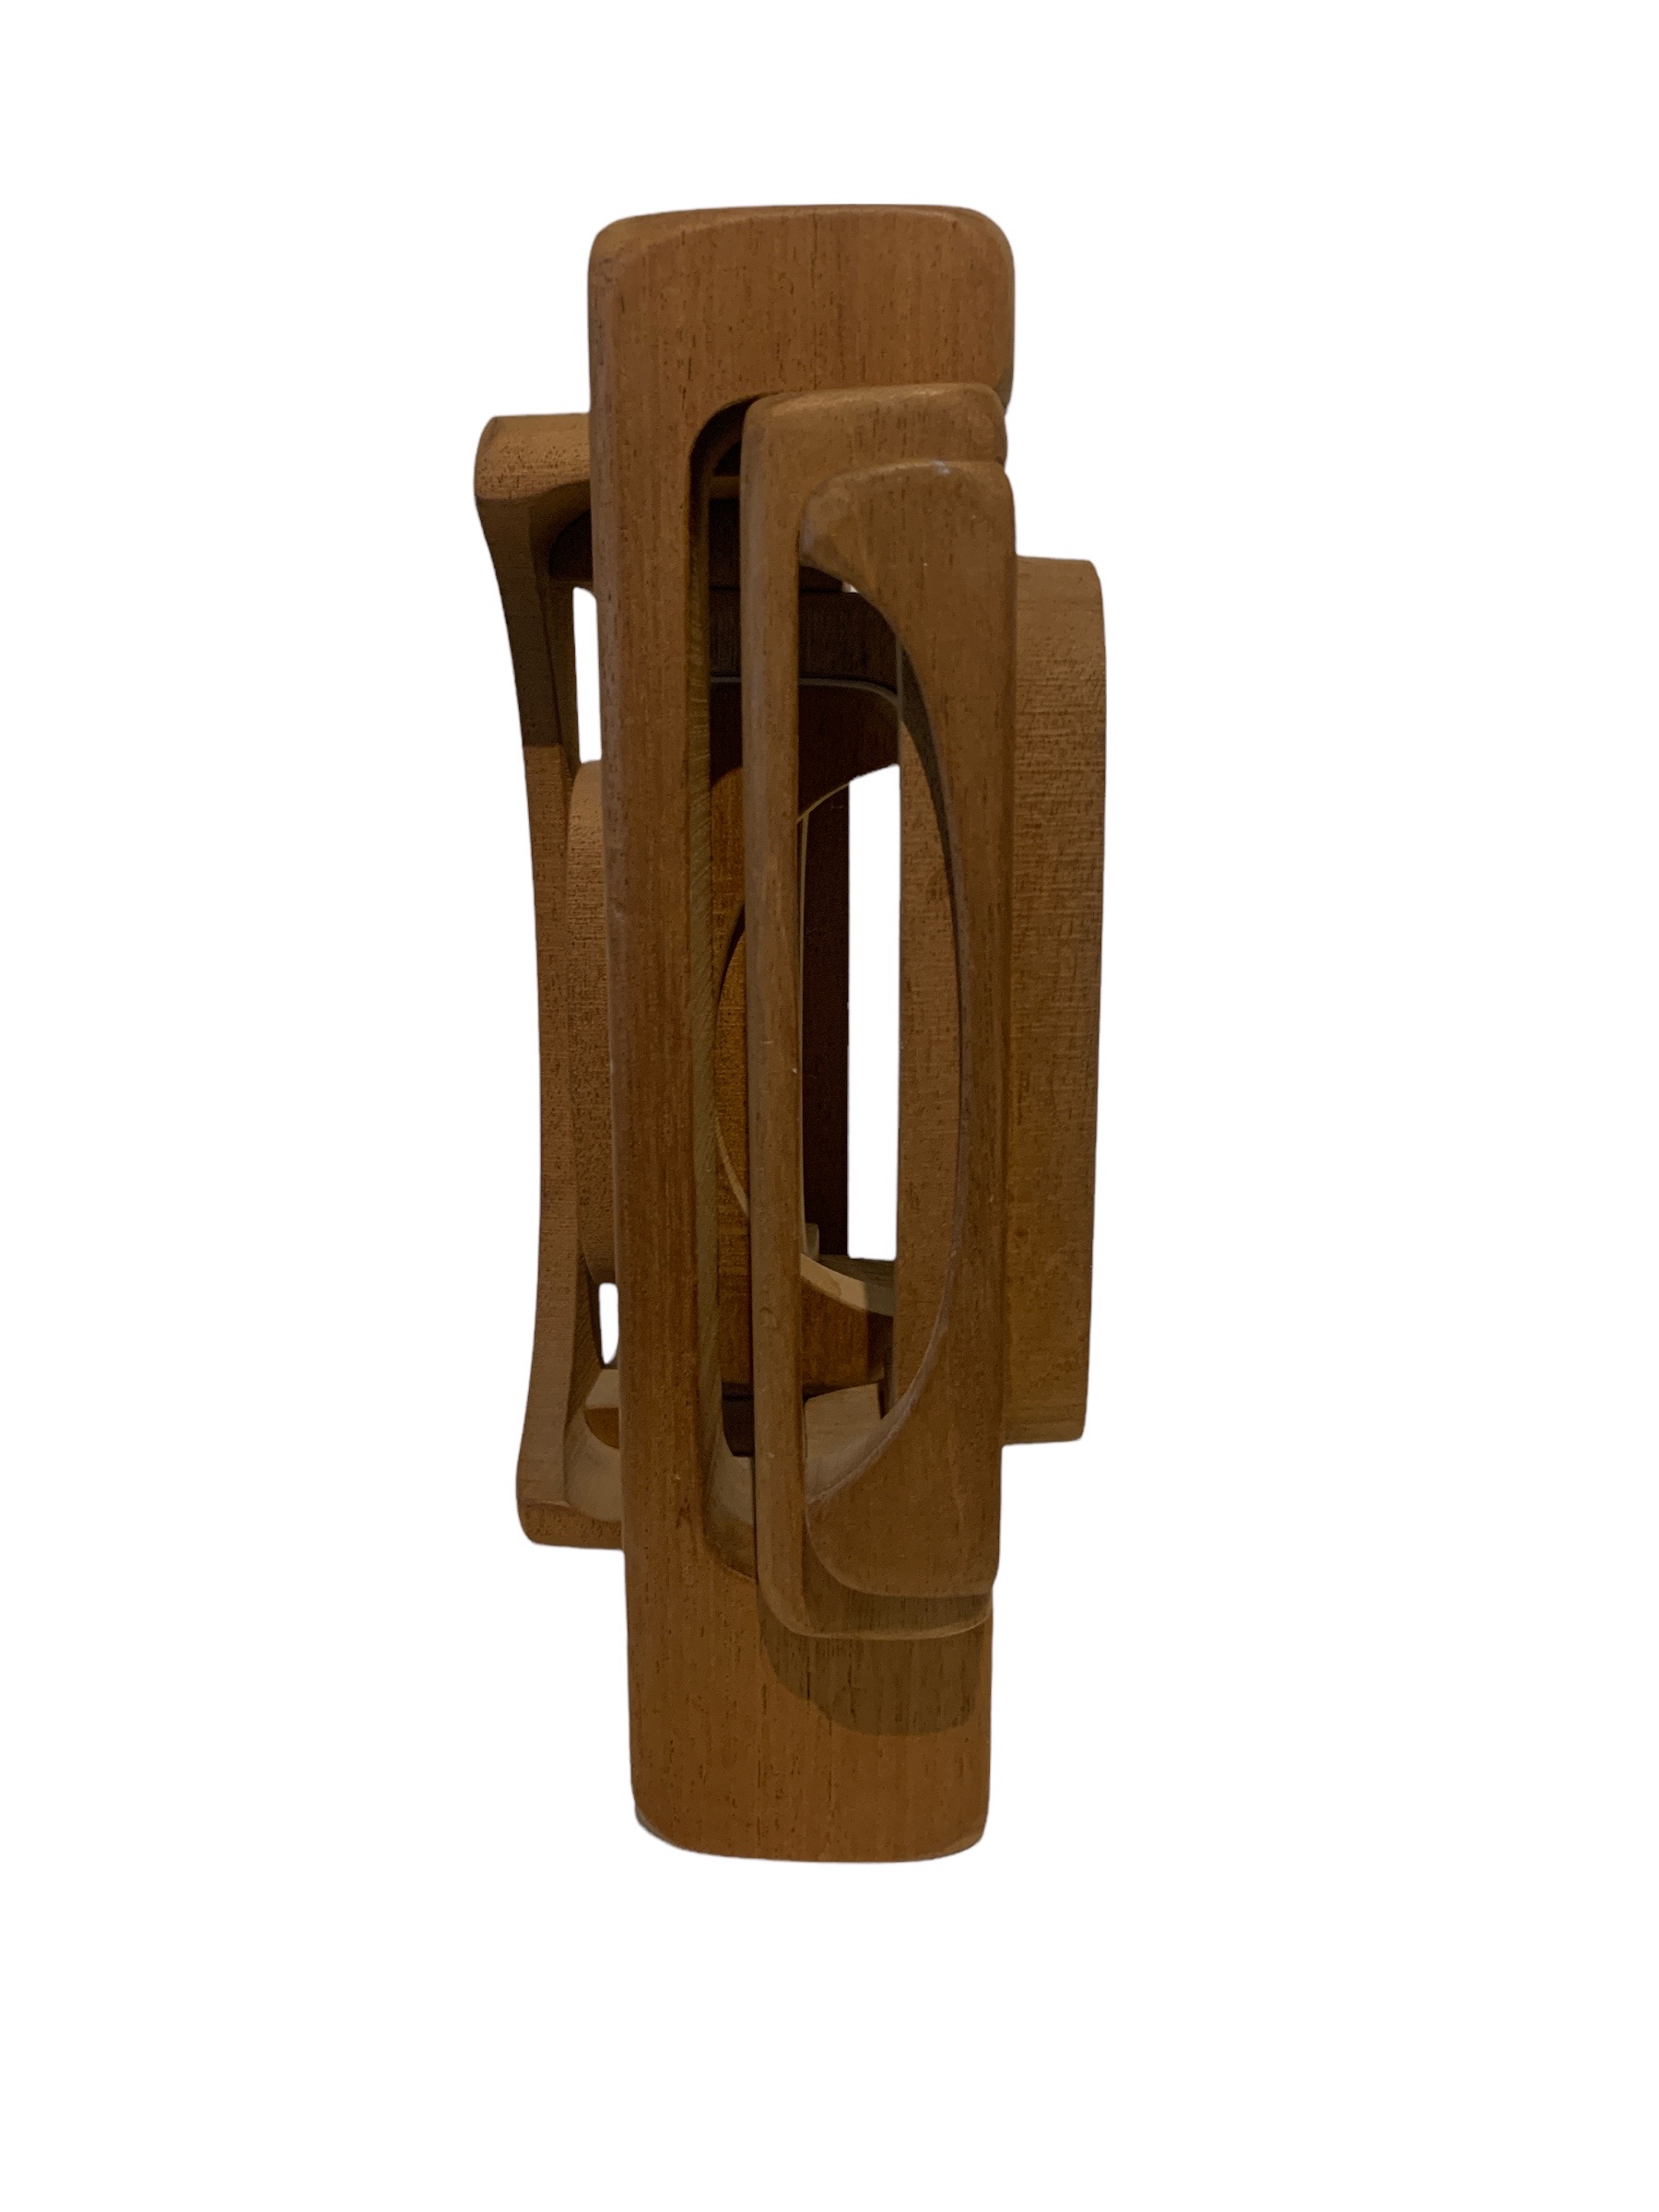 BRIAN WILLSHER, BRITISH, 1930 - 2010, A 20TH CENTURY CARVED WOOD ABSTRACT SCULPTURE Articulated - Image 4 of 5